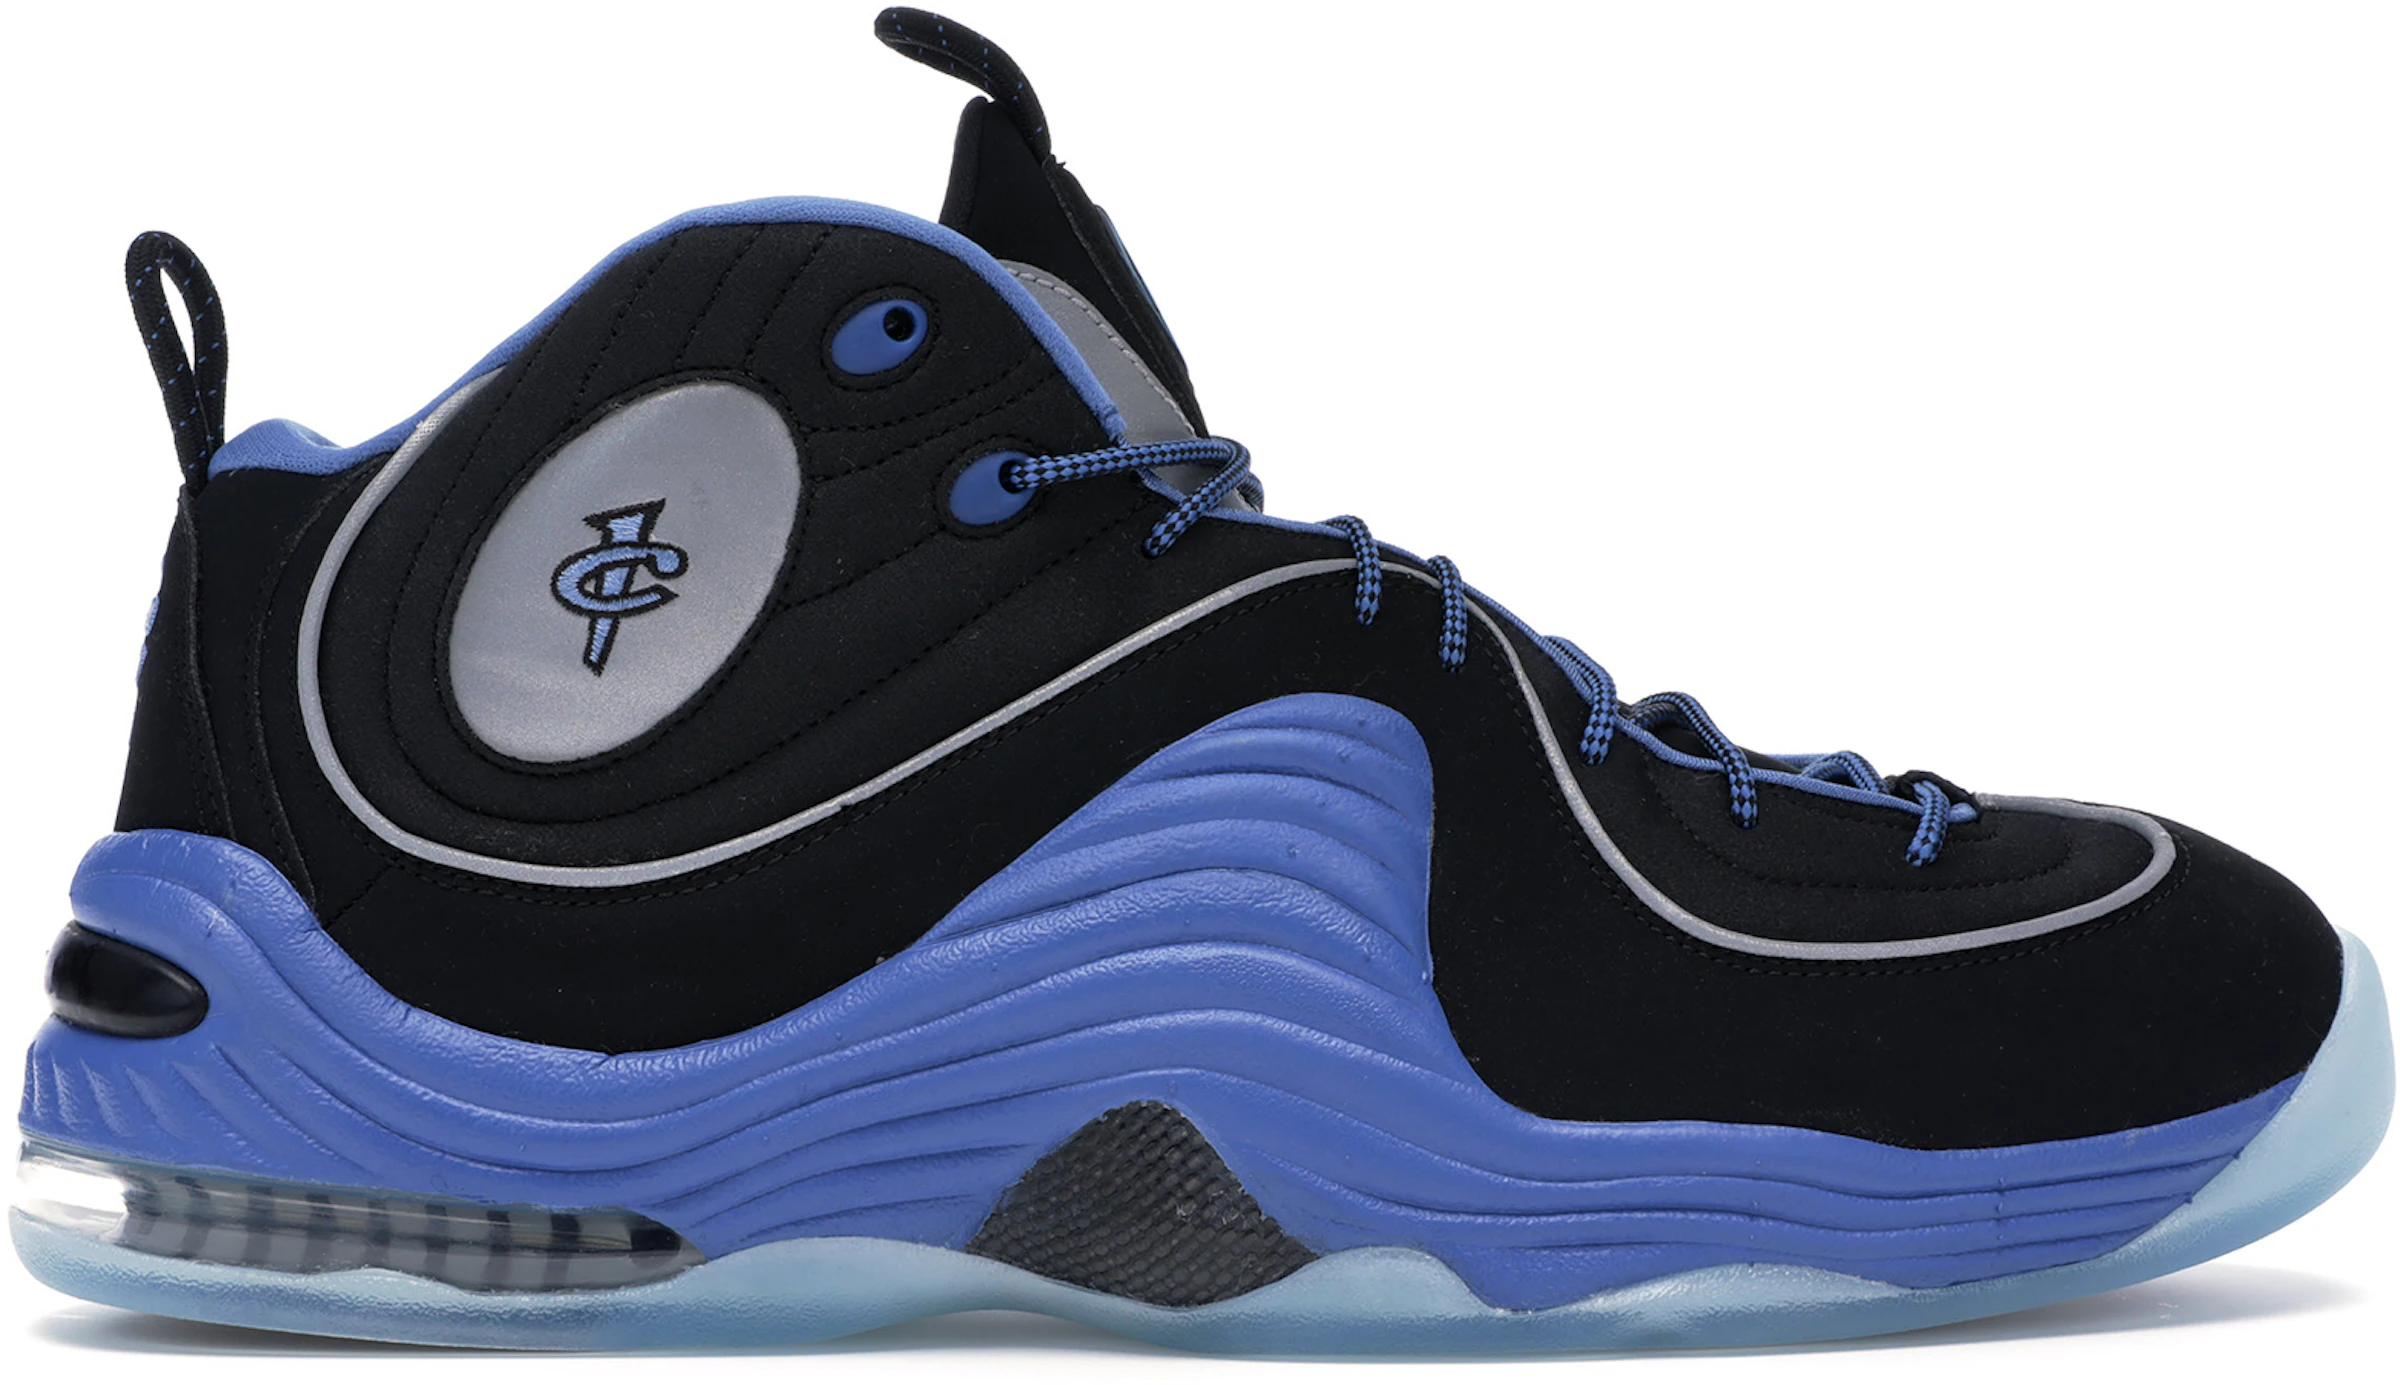 Buy Nike Basketball Penny Shoes & New Sneakers - StockX